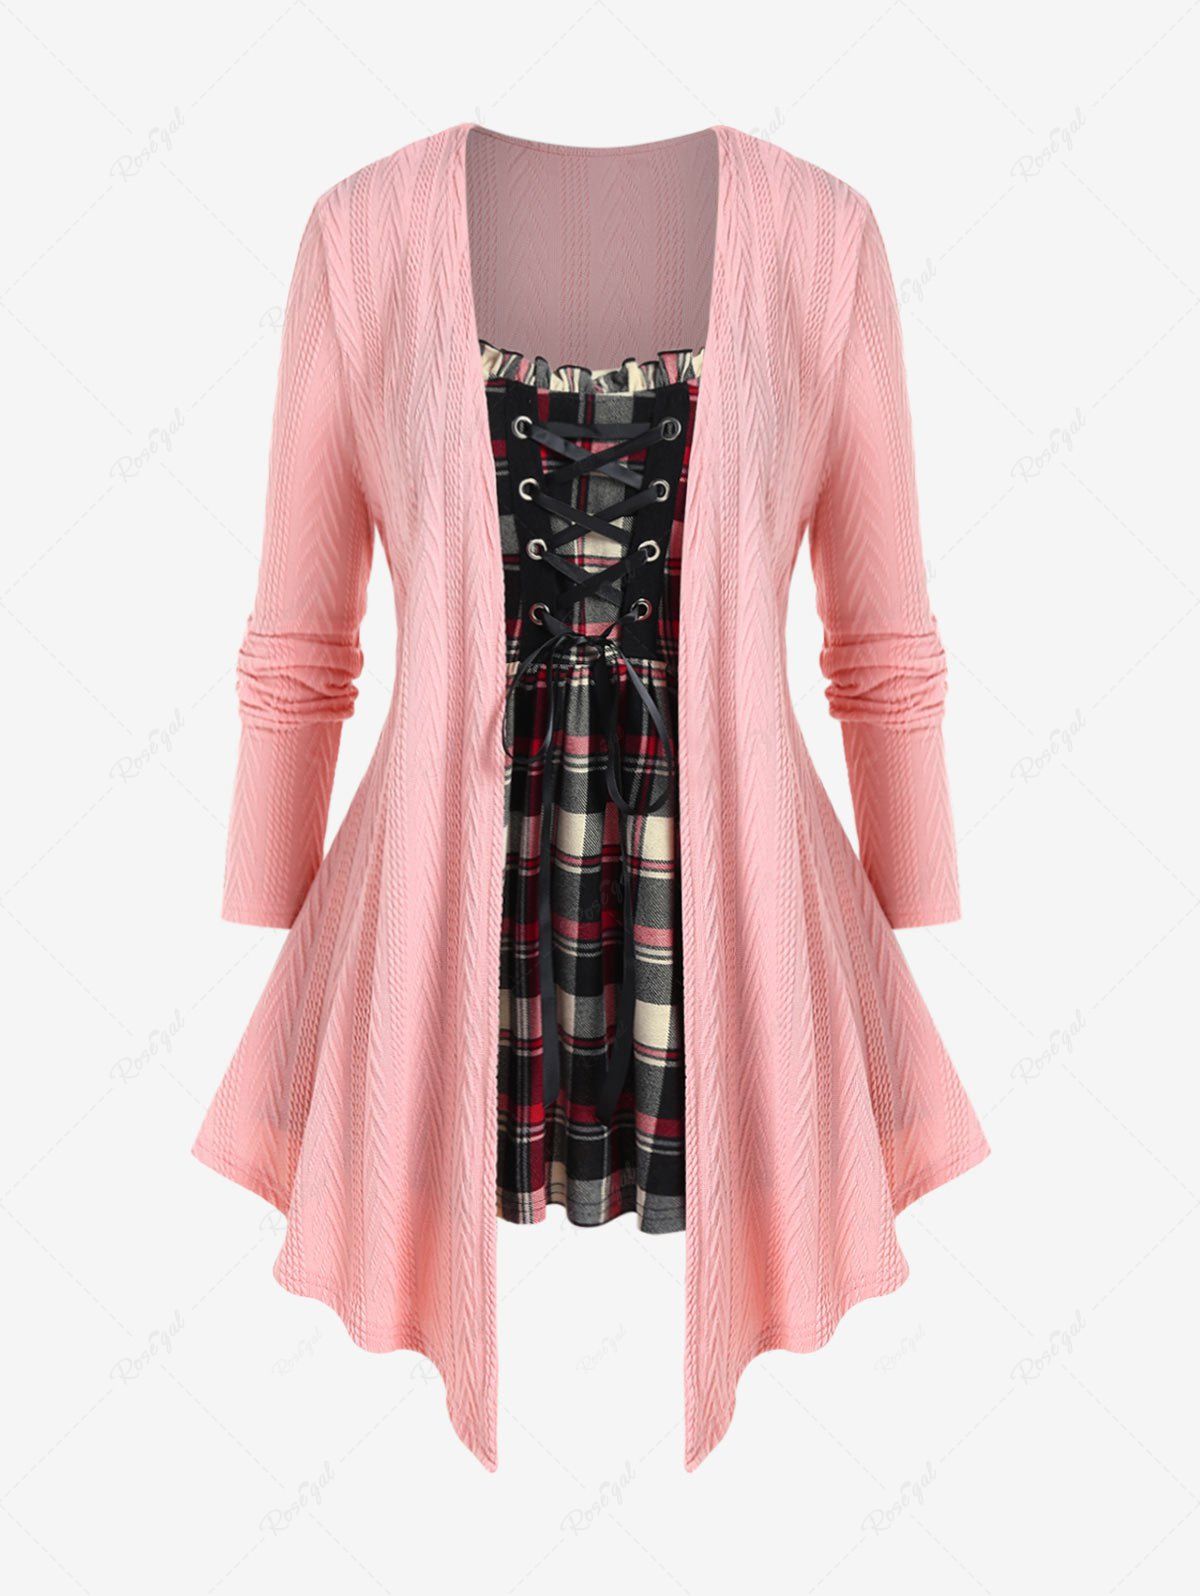 Sale Plus Size Frilled Plaid Panel Lace-up Textured Knit 2 In 1 Top  